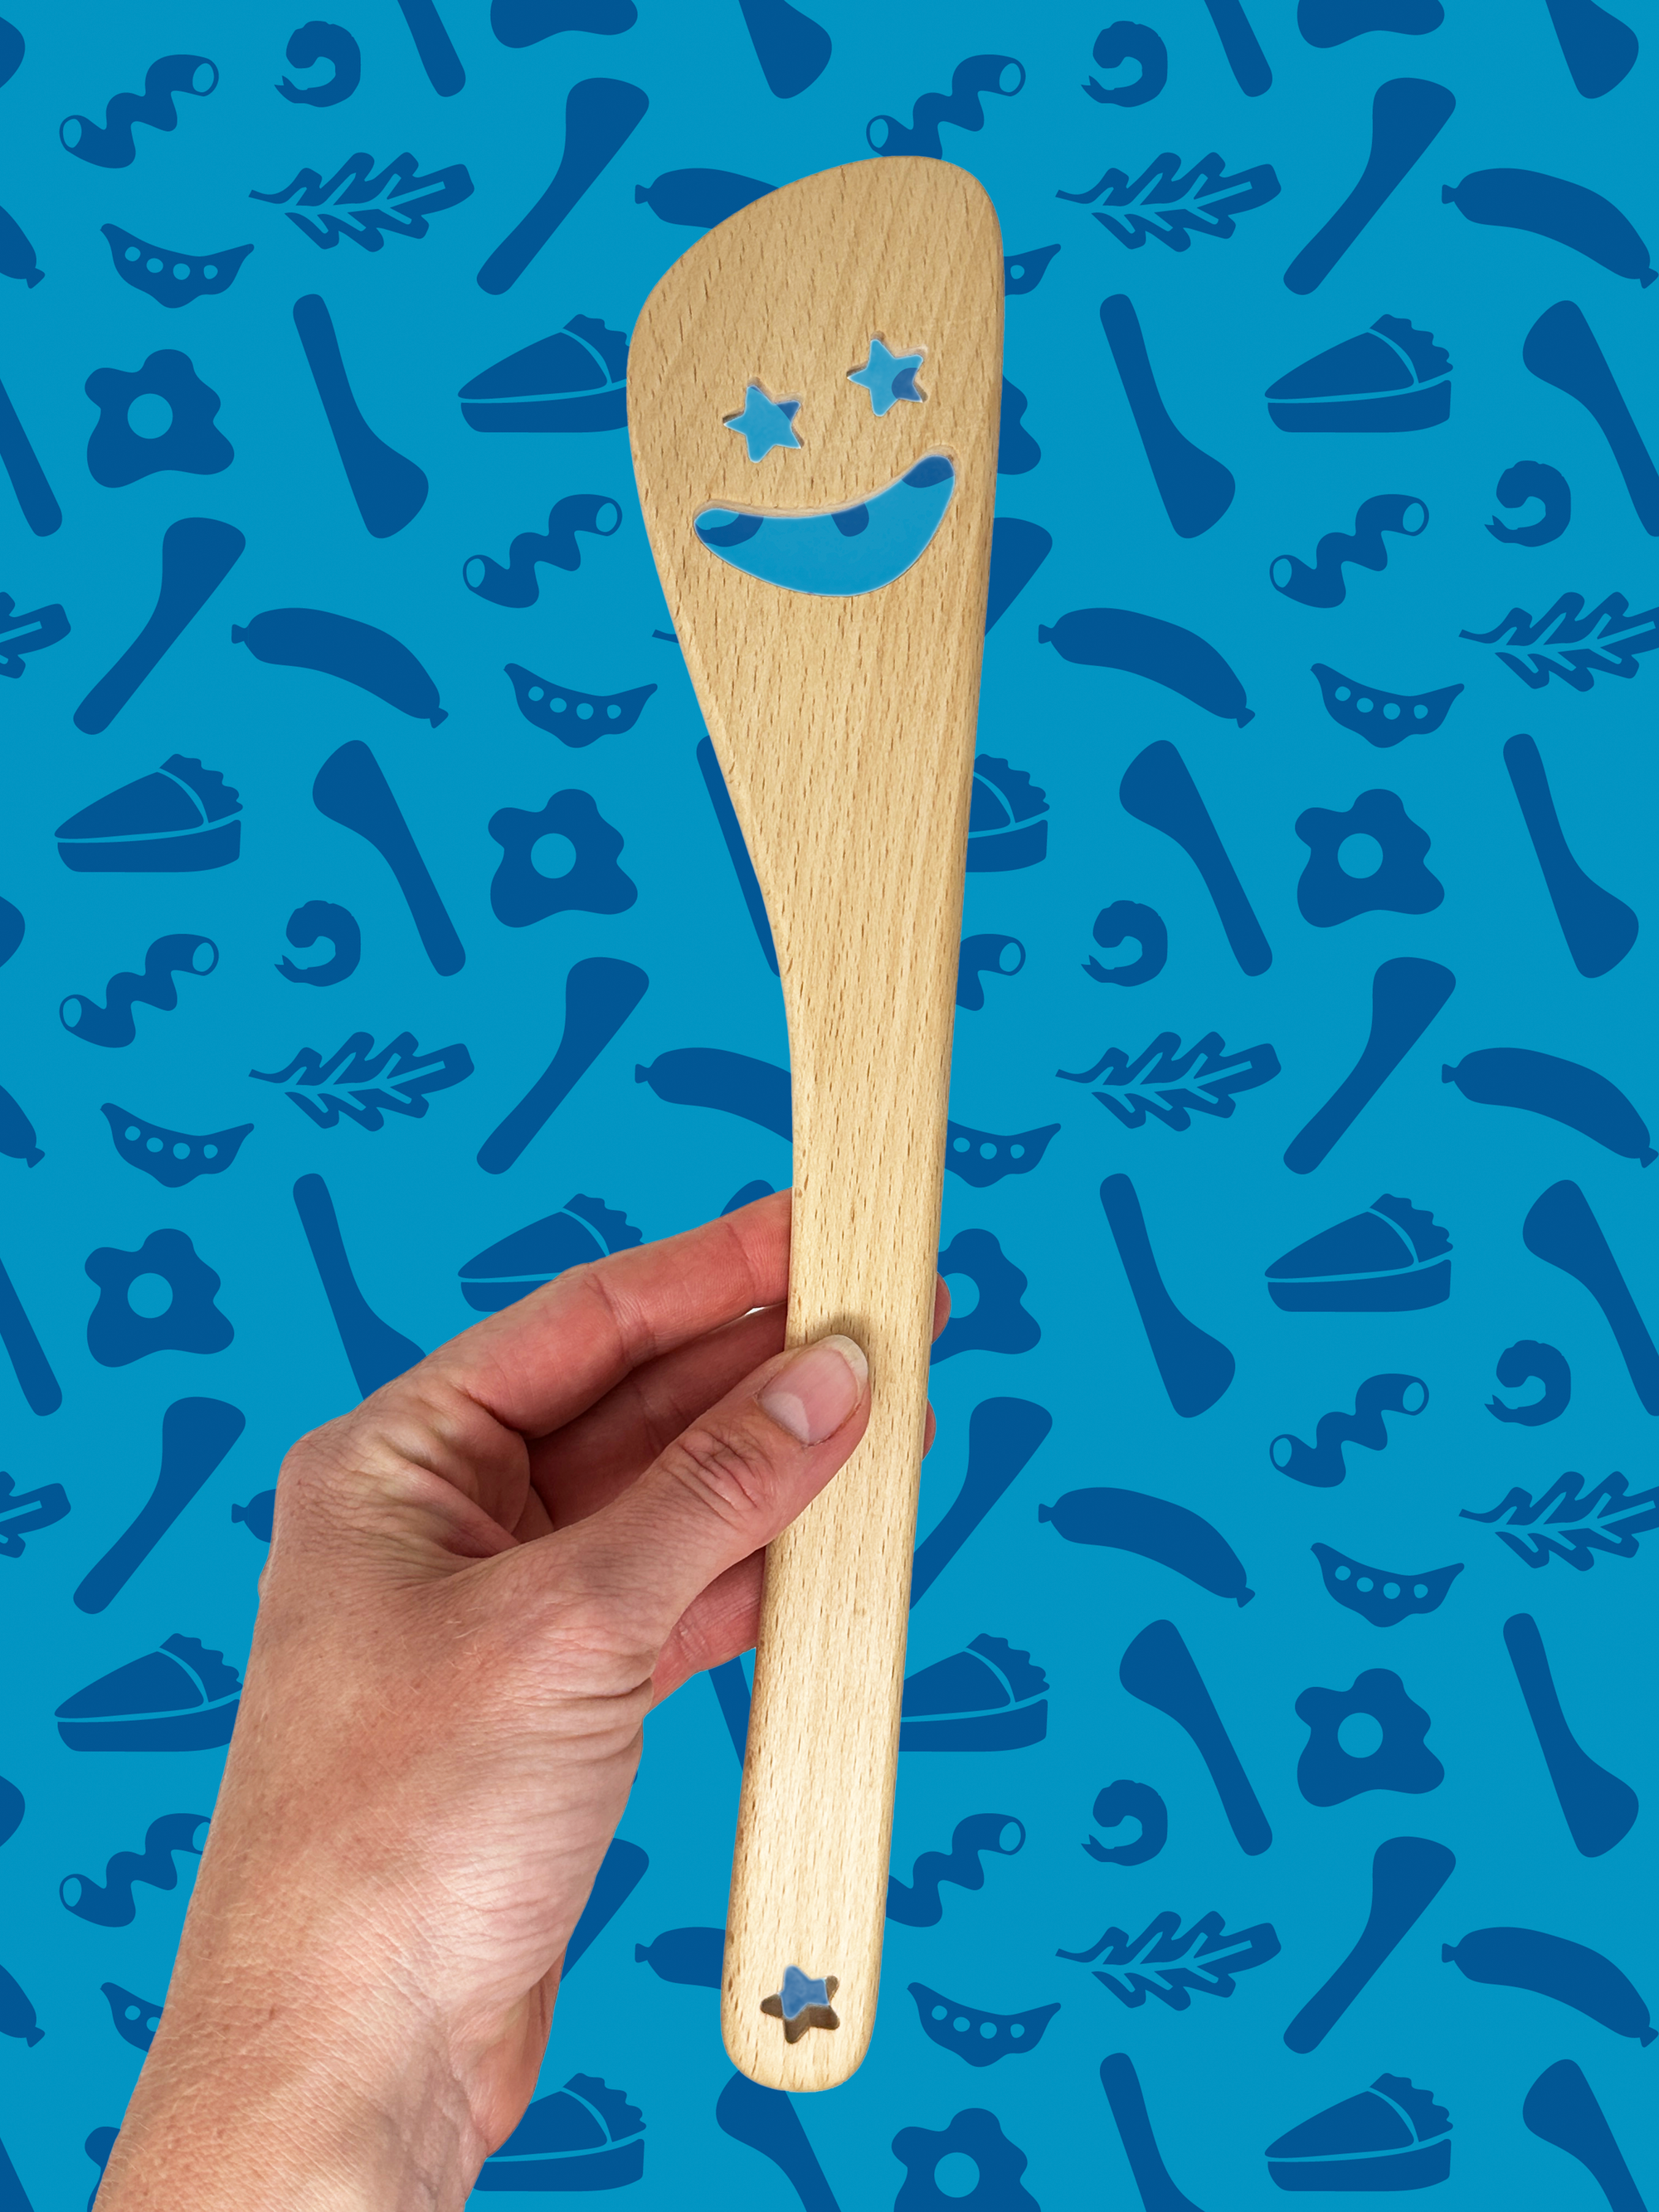 Excited Pat the Spatula